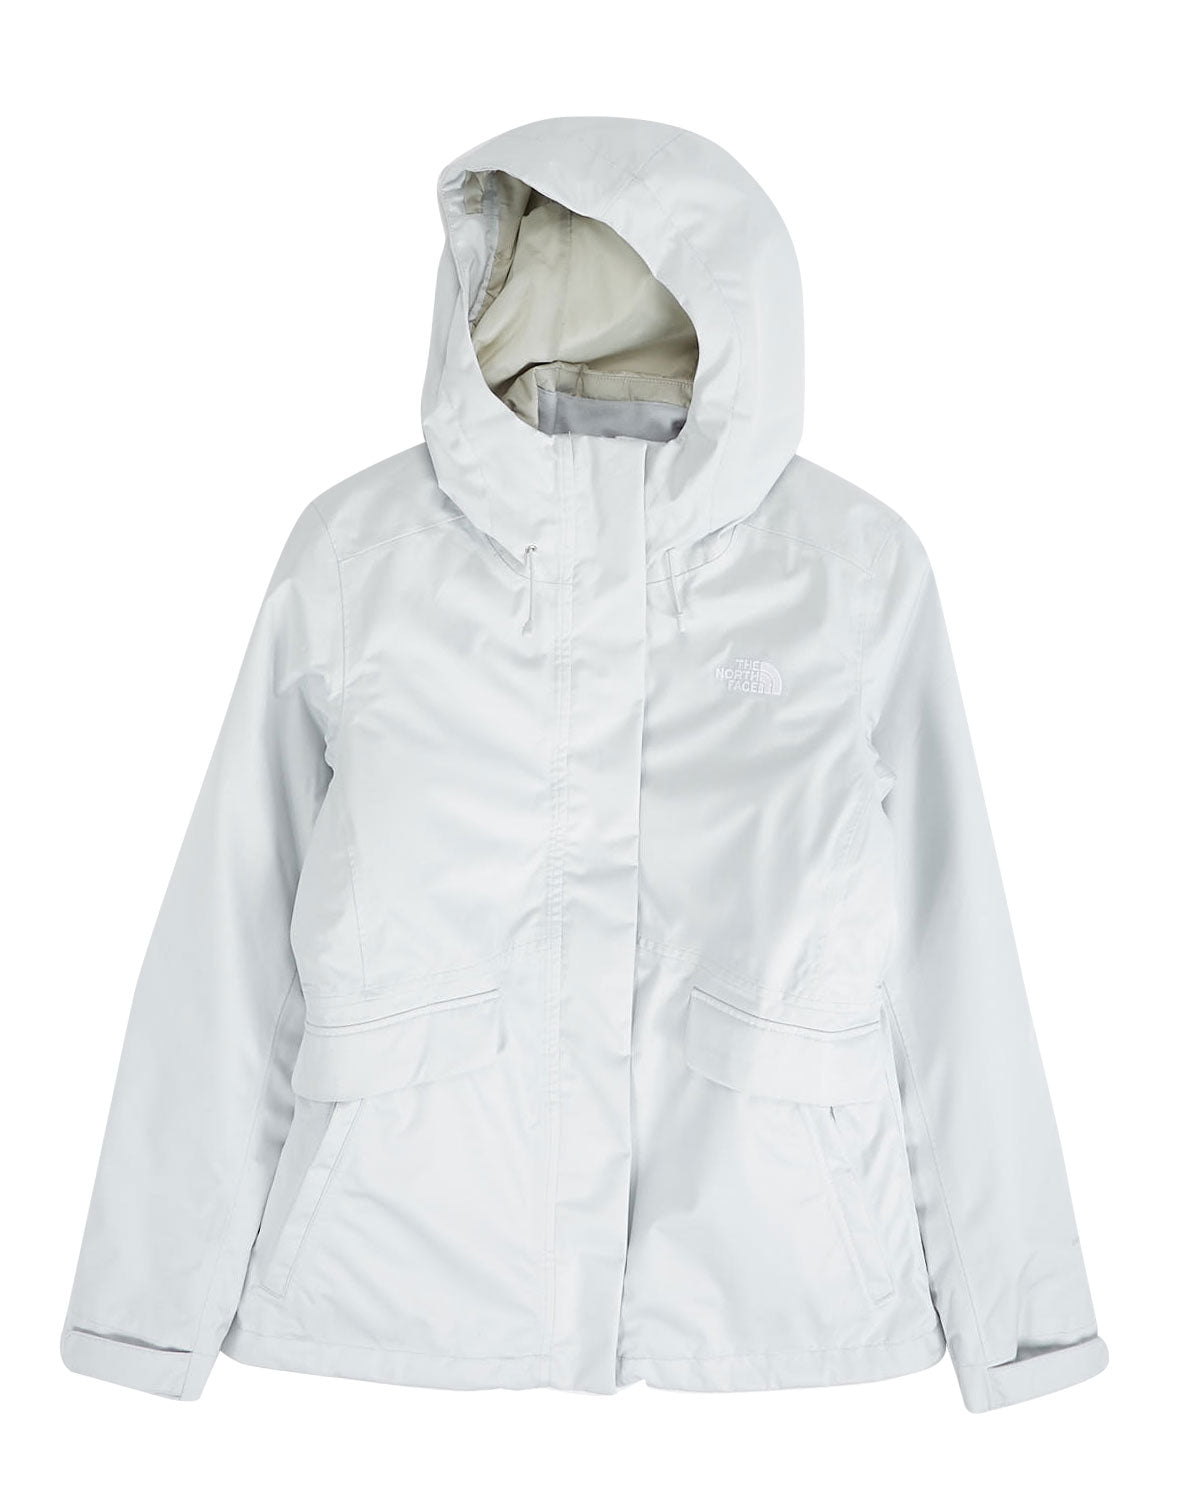 north face monarch triclimate jacket